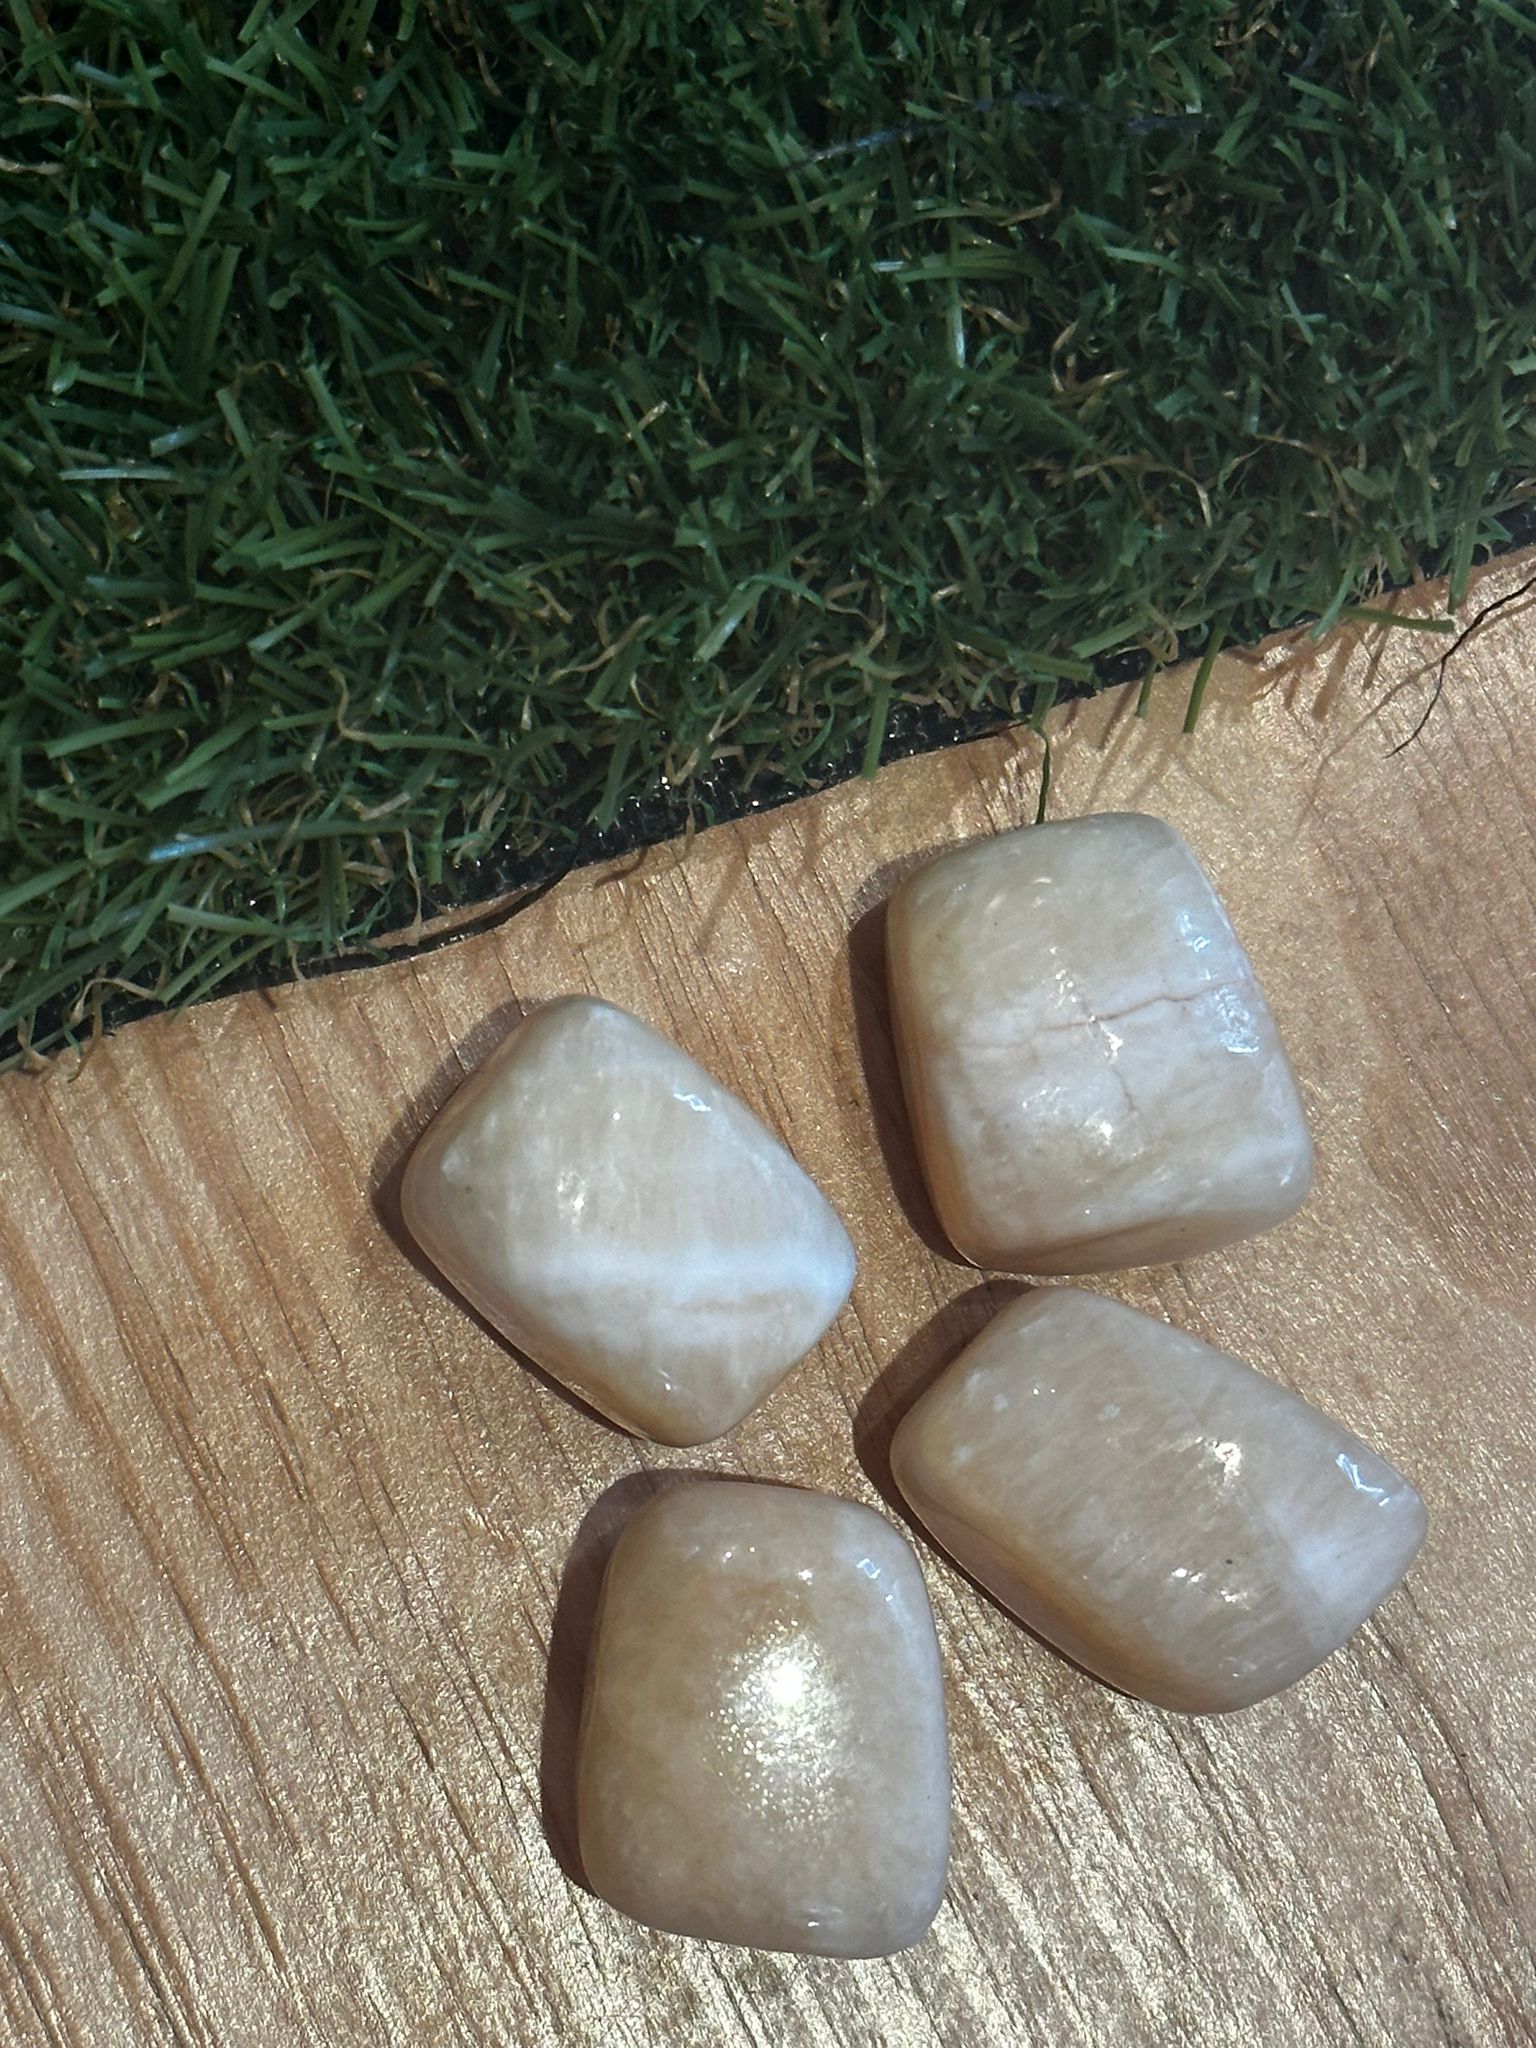 Peach Aventurine Tumble Stone - The Stone of Calm Dignity - The Hare and the Moon